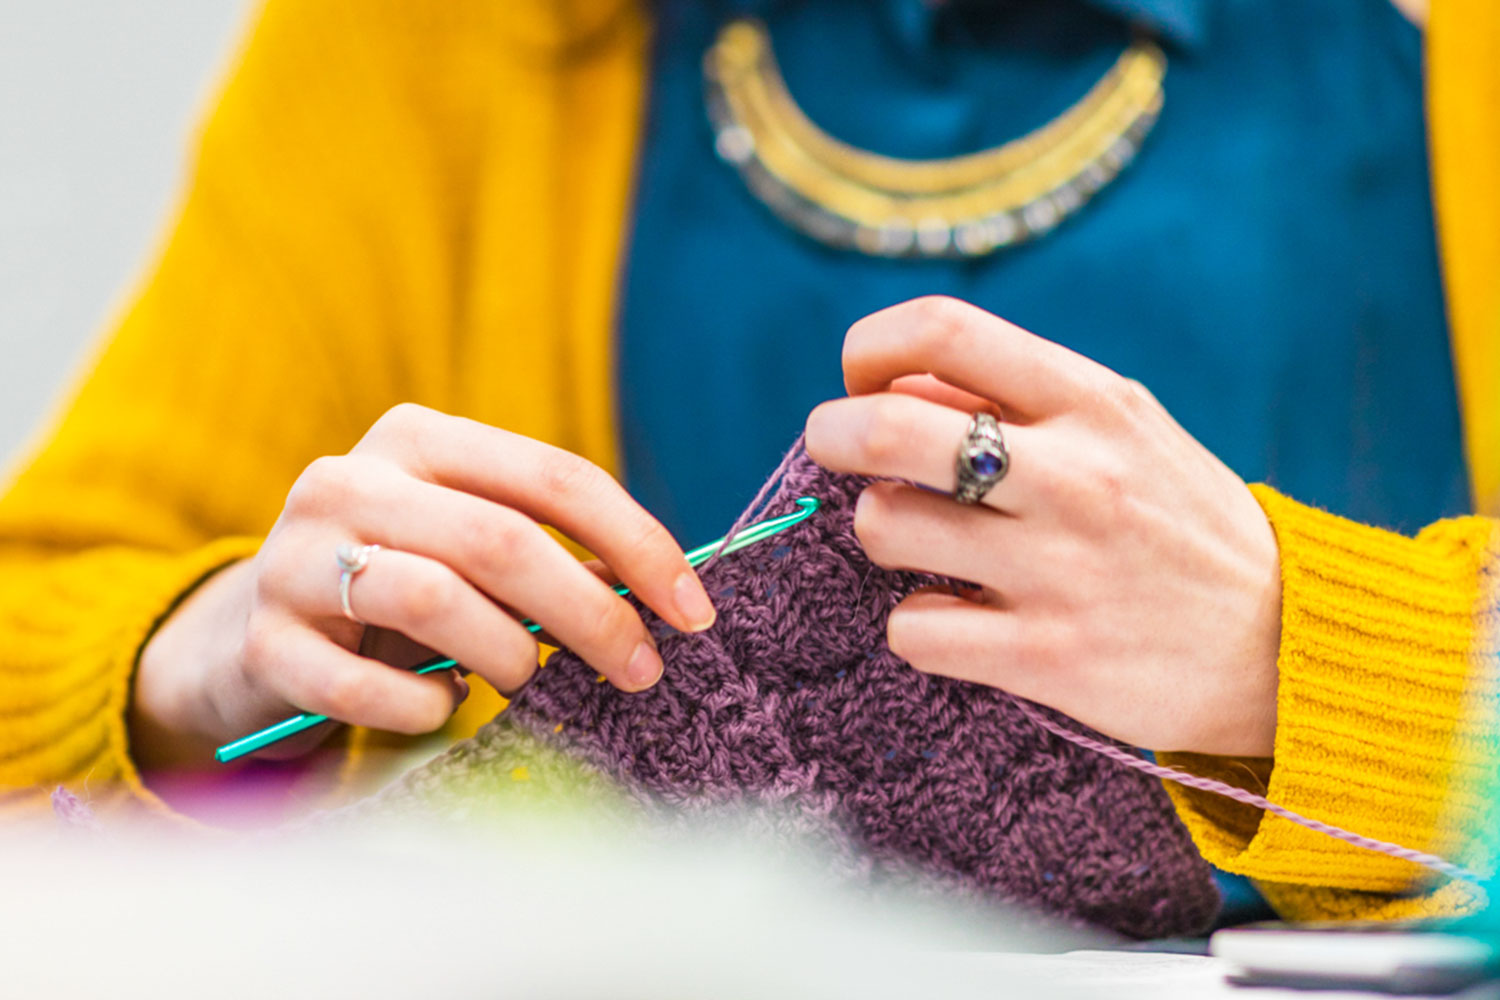 Person working on a knitting project using purple yarn